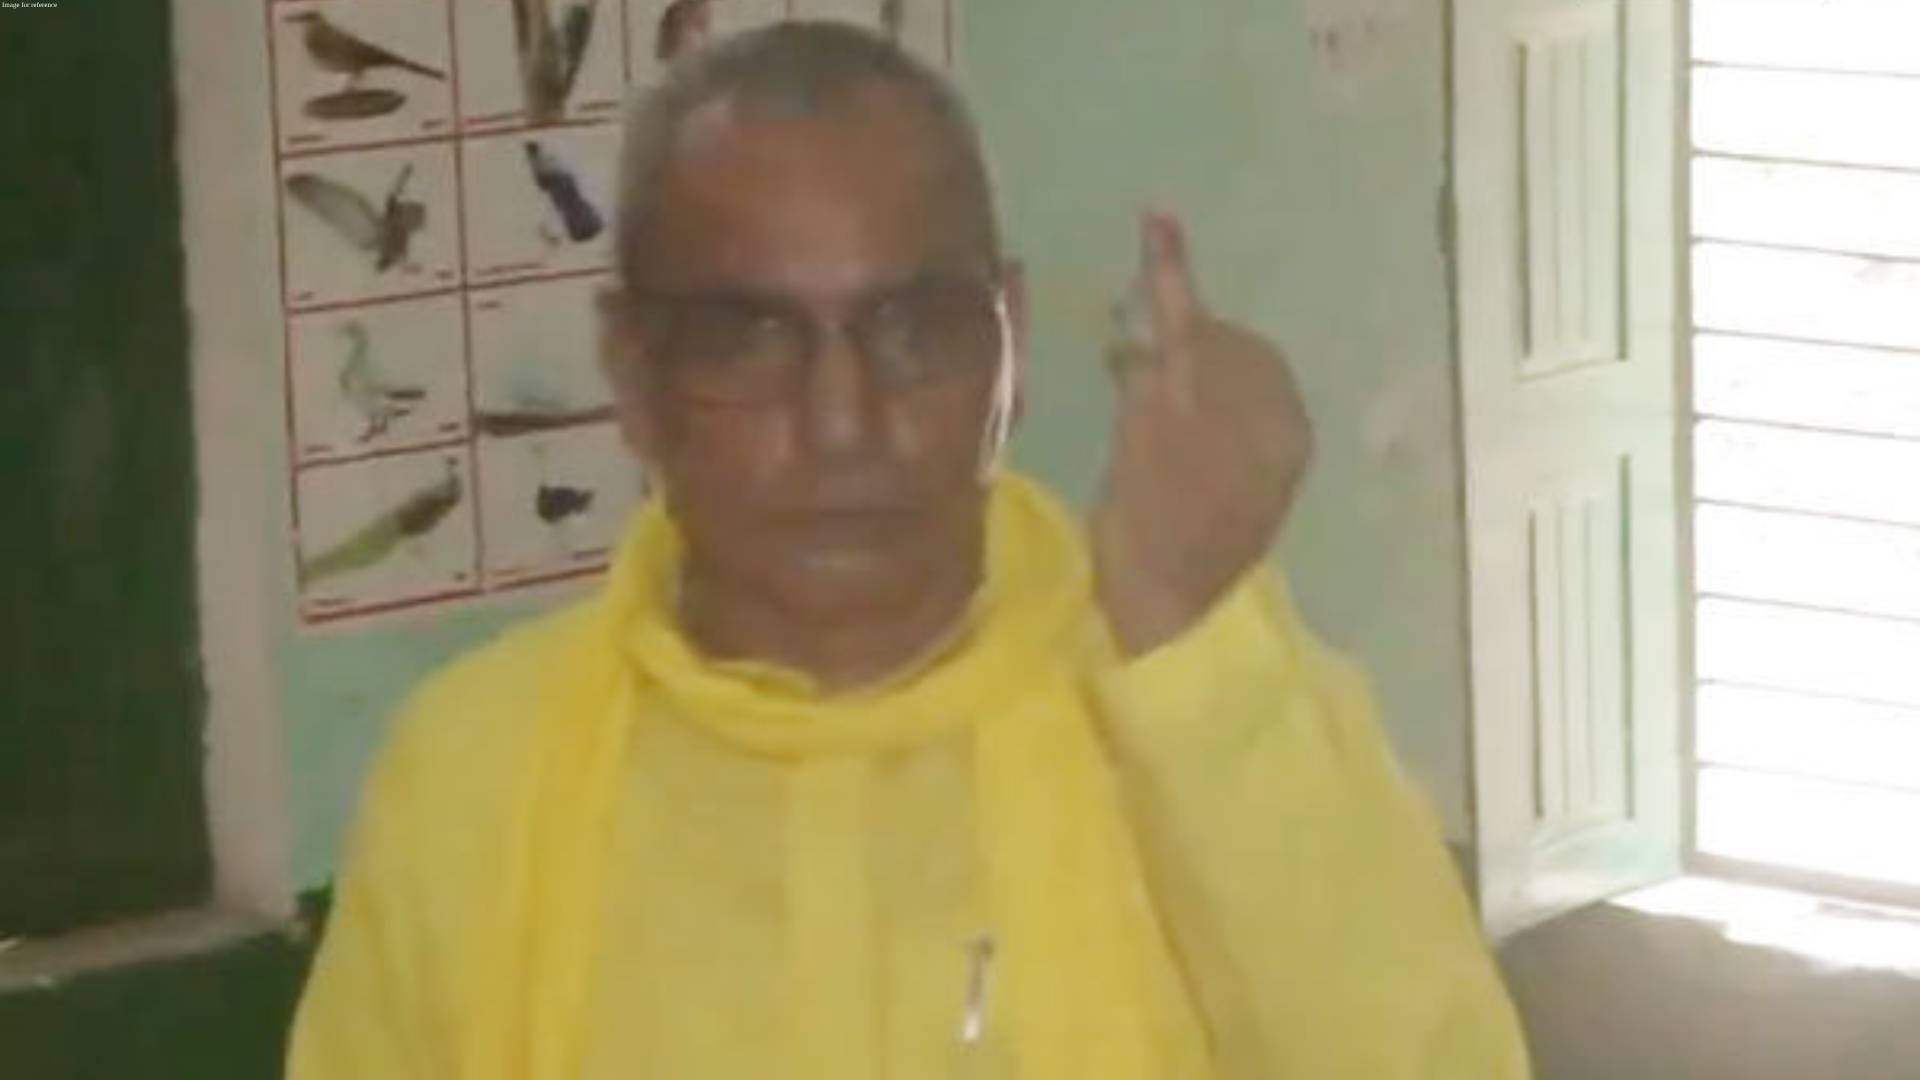 UP Minister Om Prakash Rajbhar casts his vote in Ballia, appeals to people to 